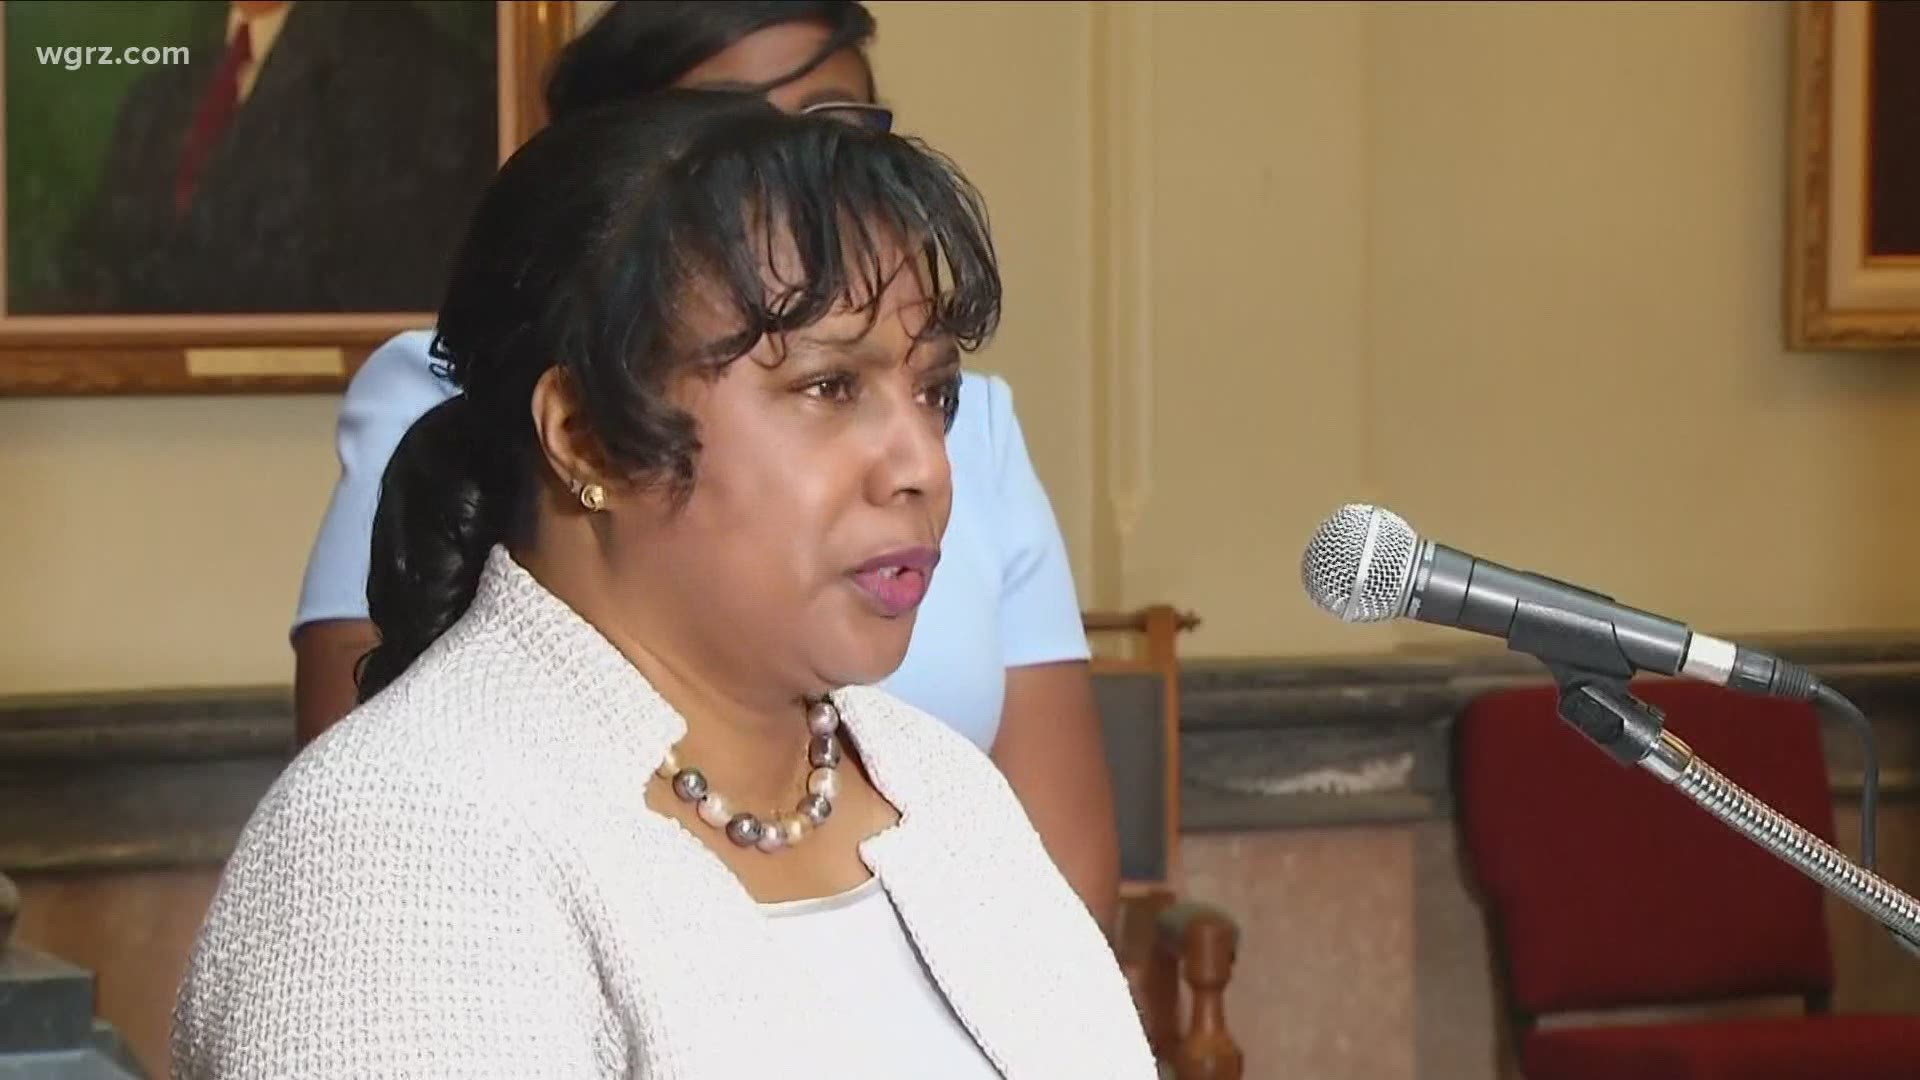 Cynthia Herriott-Sullivan was appointed today, the first woman to lead the department. She is a 24-year veteran and currently head's the city's housing authority.